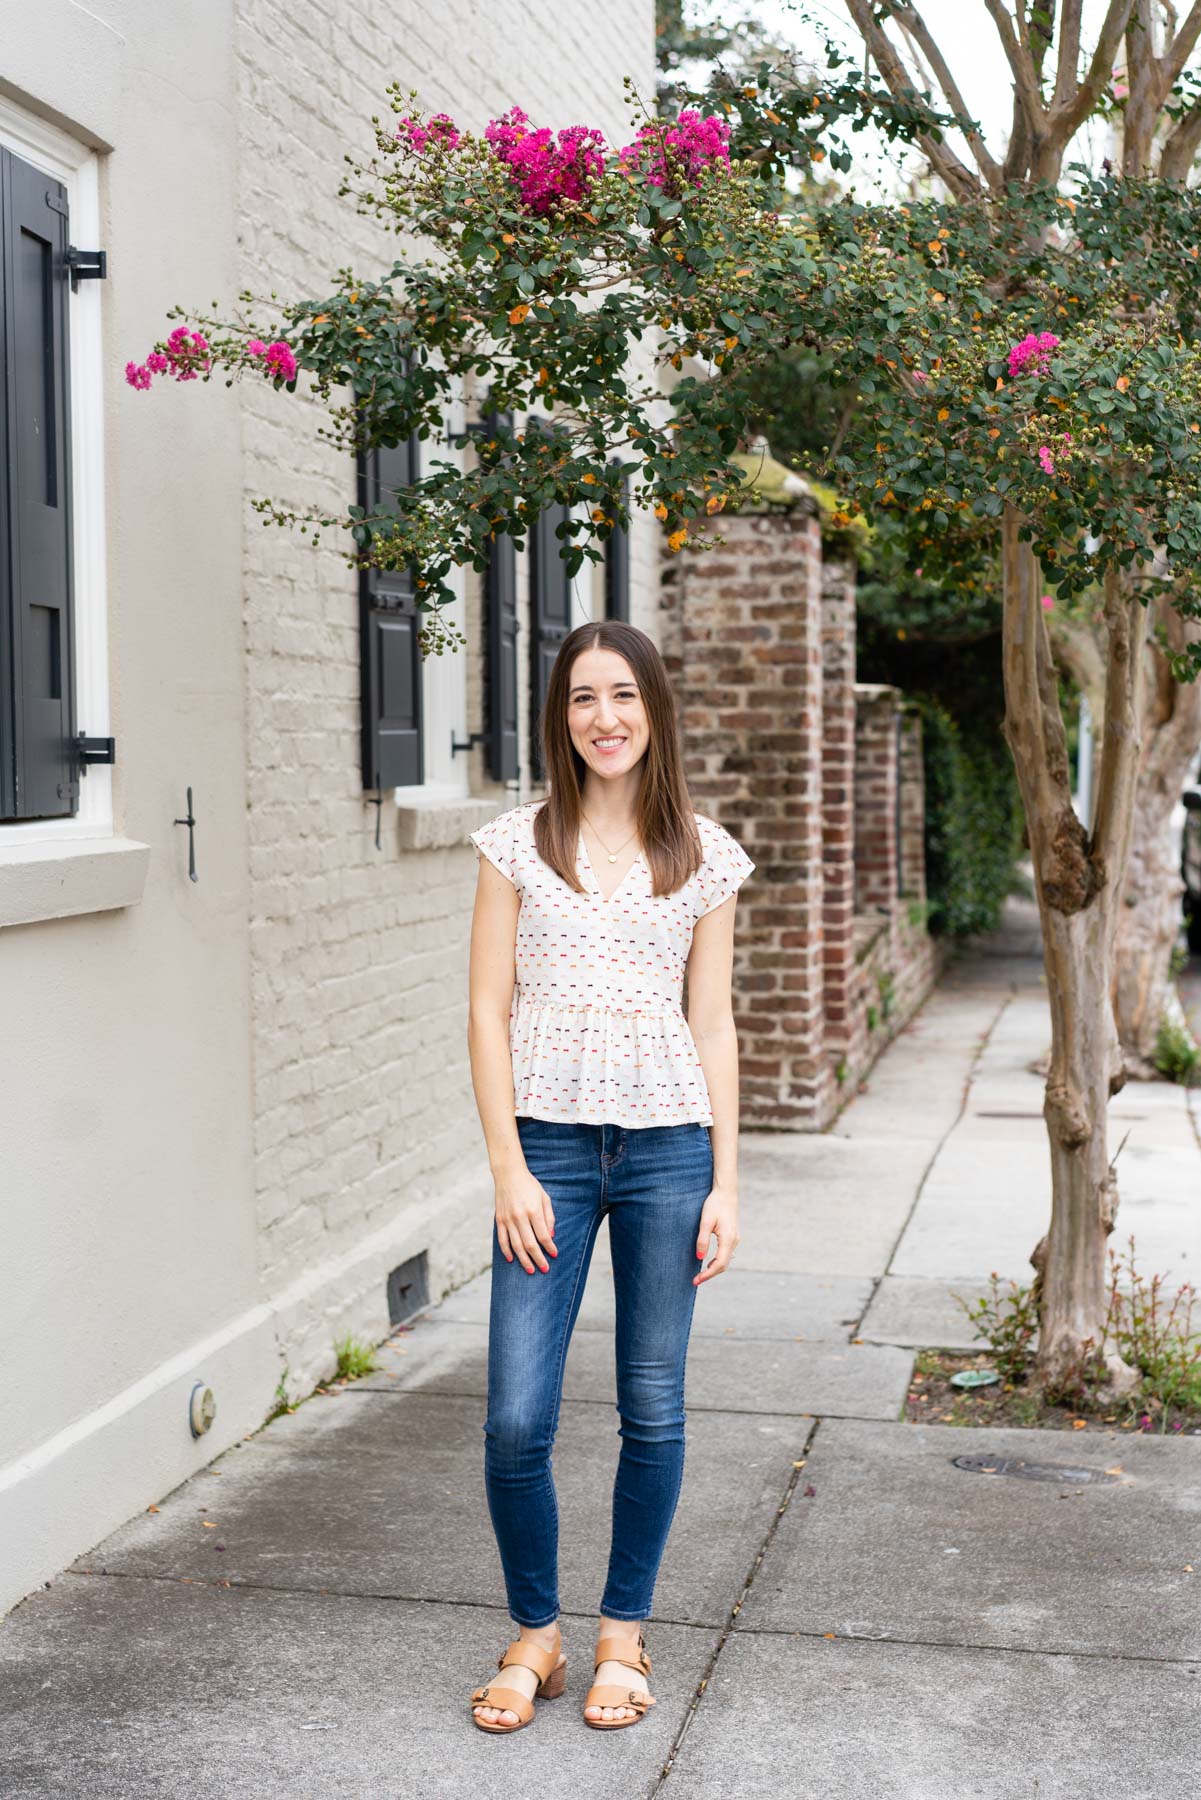 Woman in denim jeans and a white blouse demonstrating how to pose for a photoshoot by shifting her weight to one leg and smiling naturally at the camera